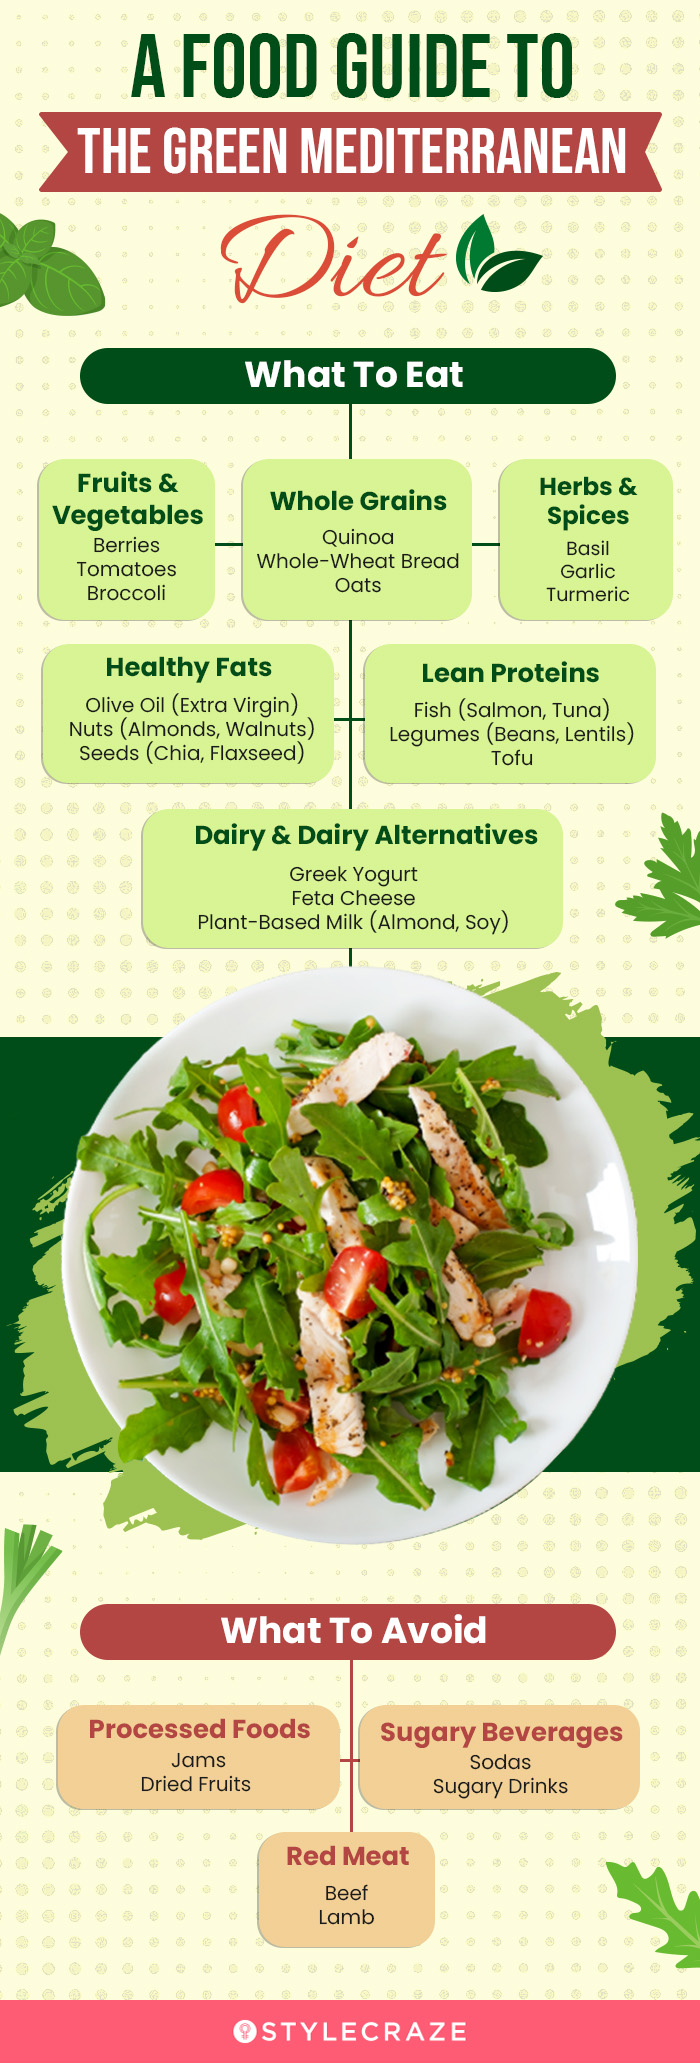 a food guide to the green mediterranean diet(infographic)